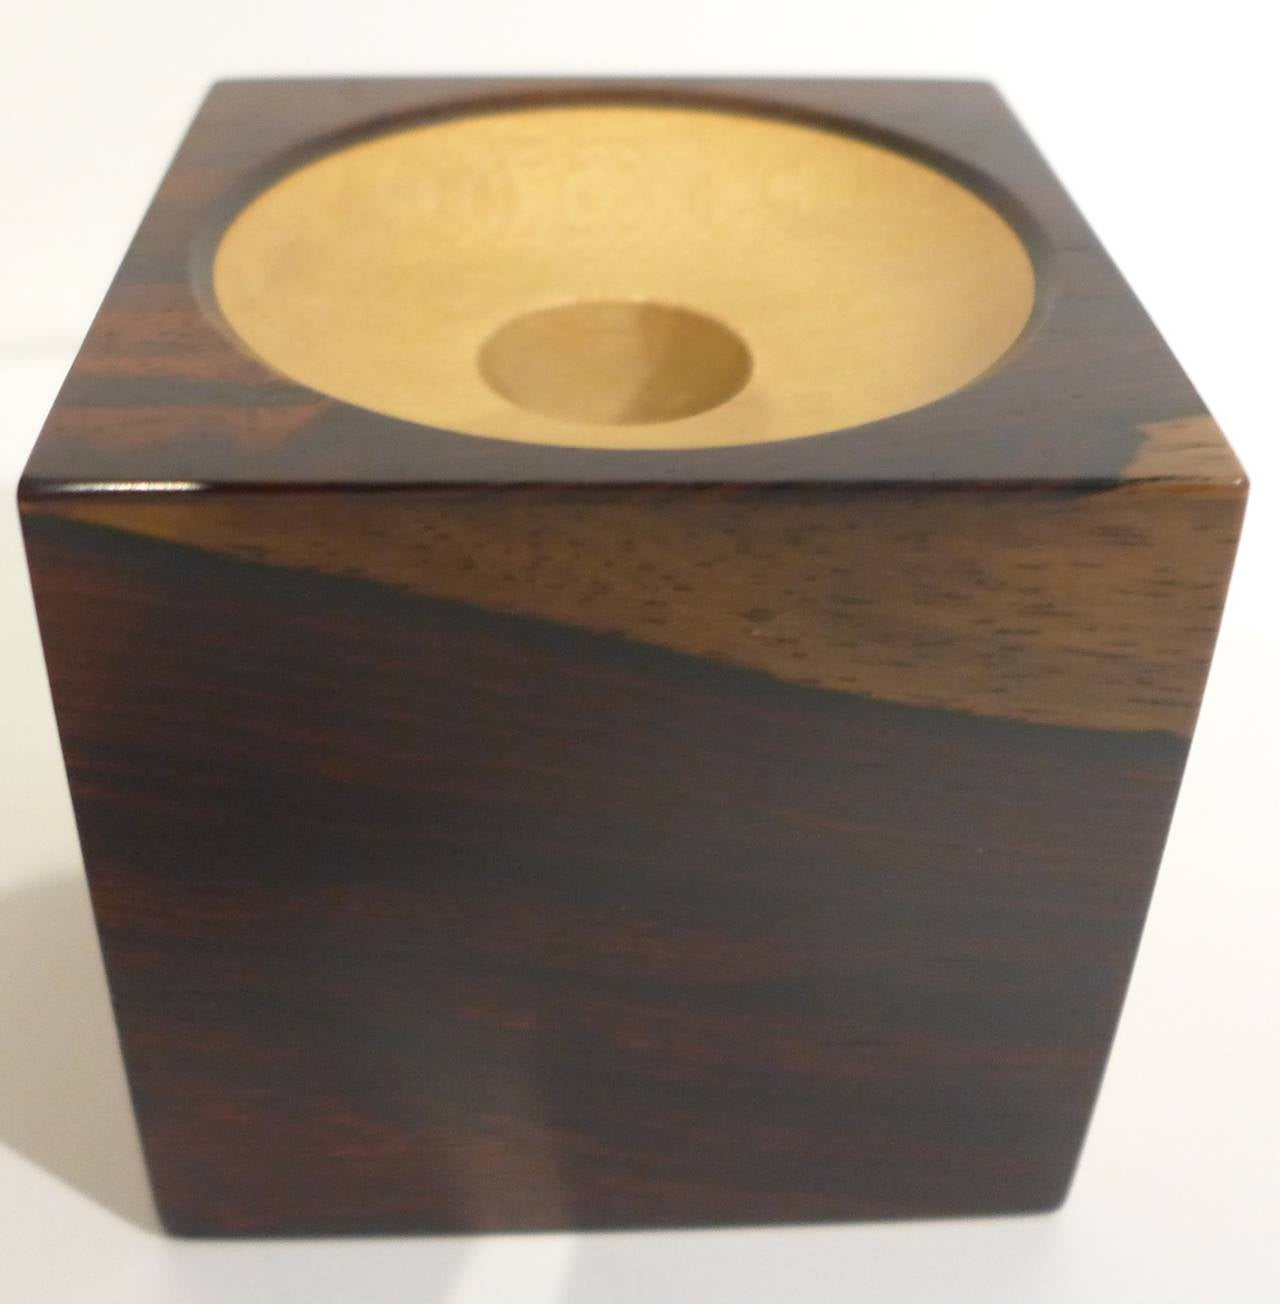 Small candleholder by renowned British woodworker and furniture maker John Makepeace (b. 1939), made of rosewood and ash, circa 1975. With maker's mark.